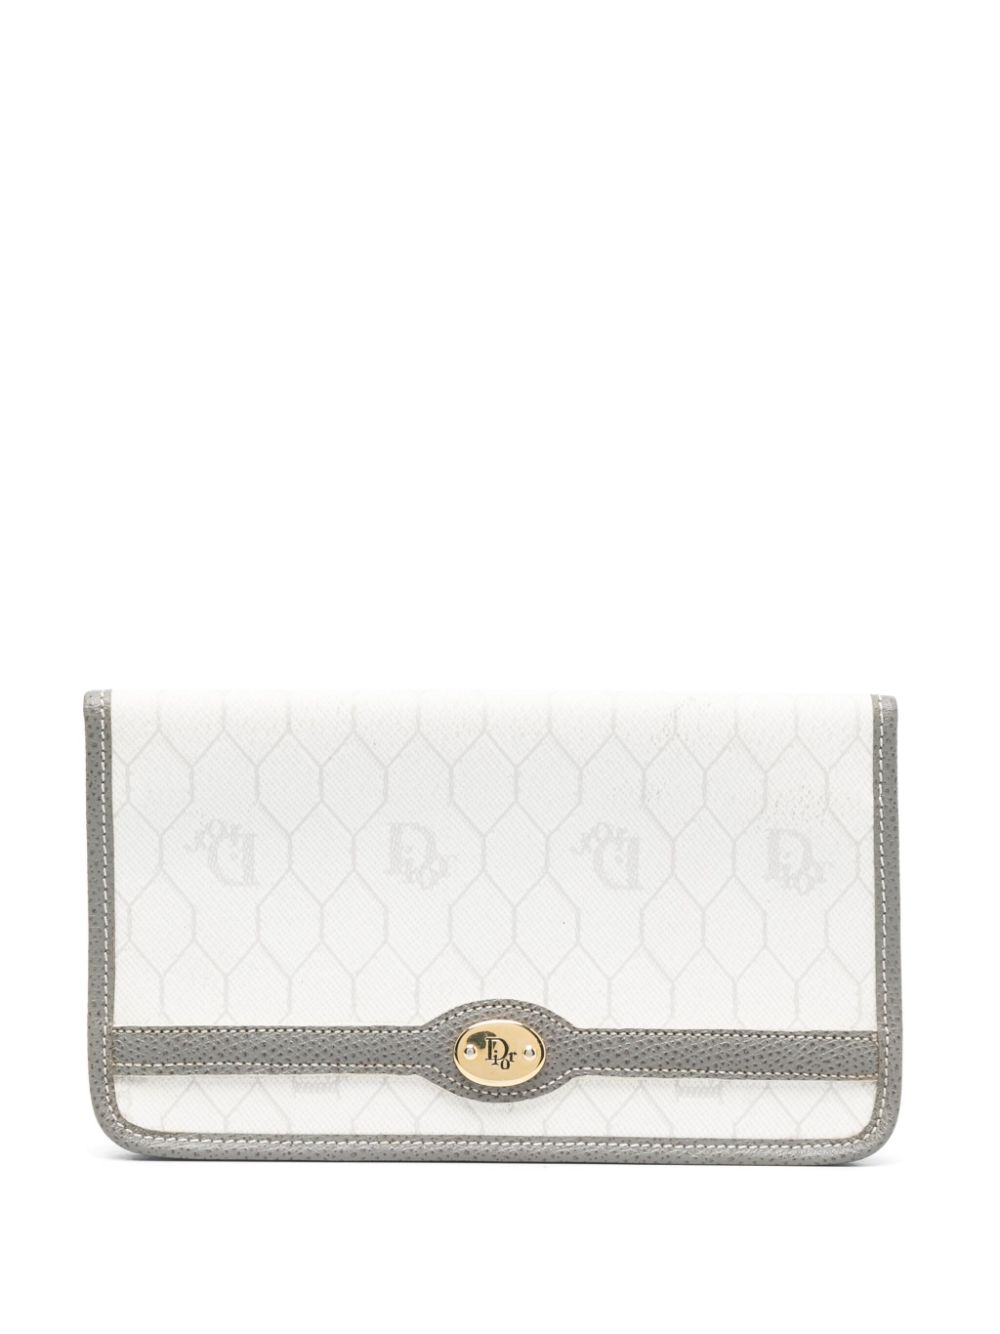 Christian Dior 1980s pre-owned Honeycomb Passport Holder - Farfetch